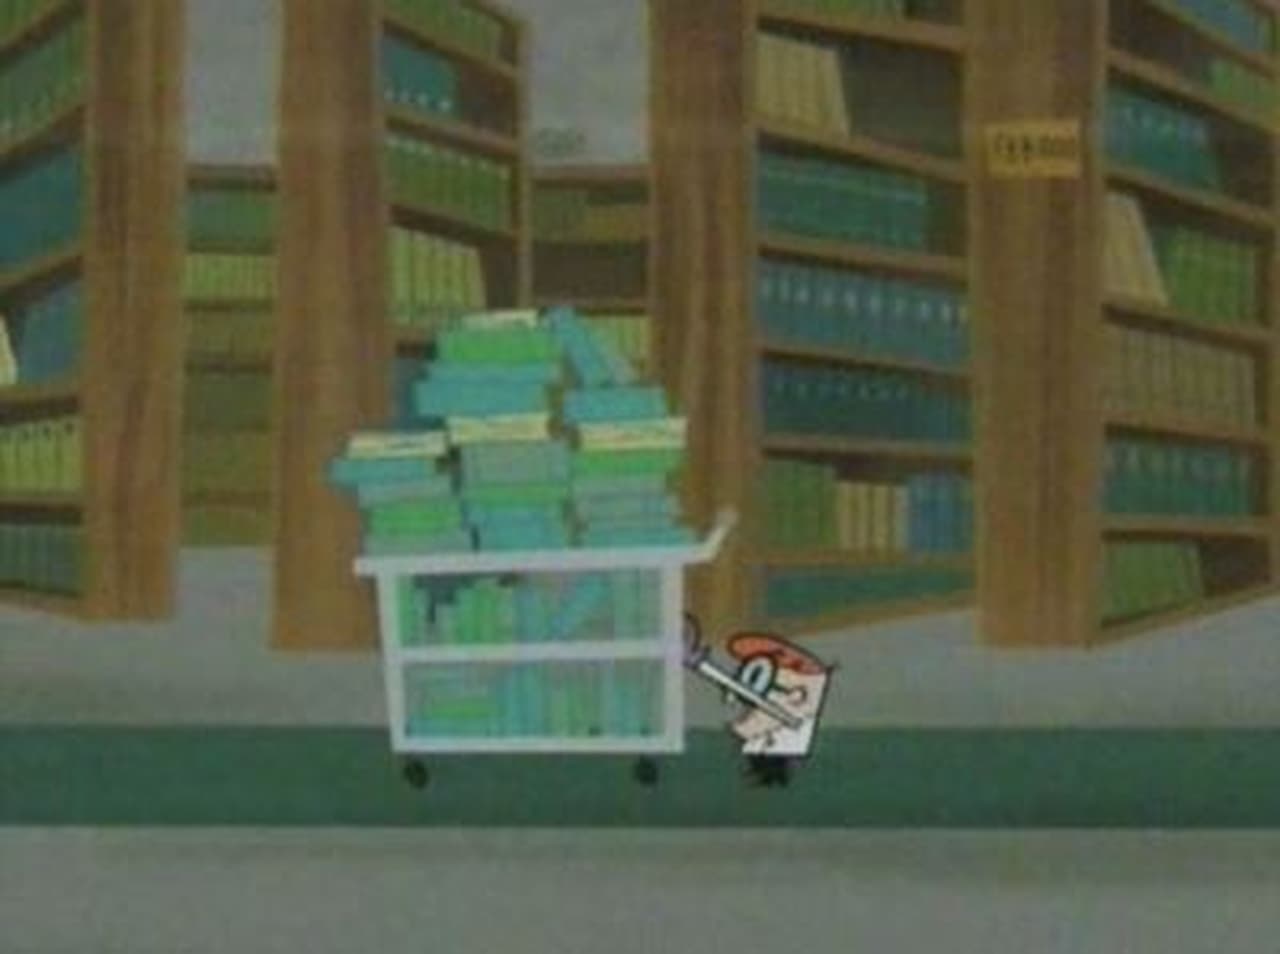 Dexters Library